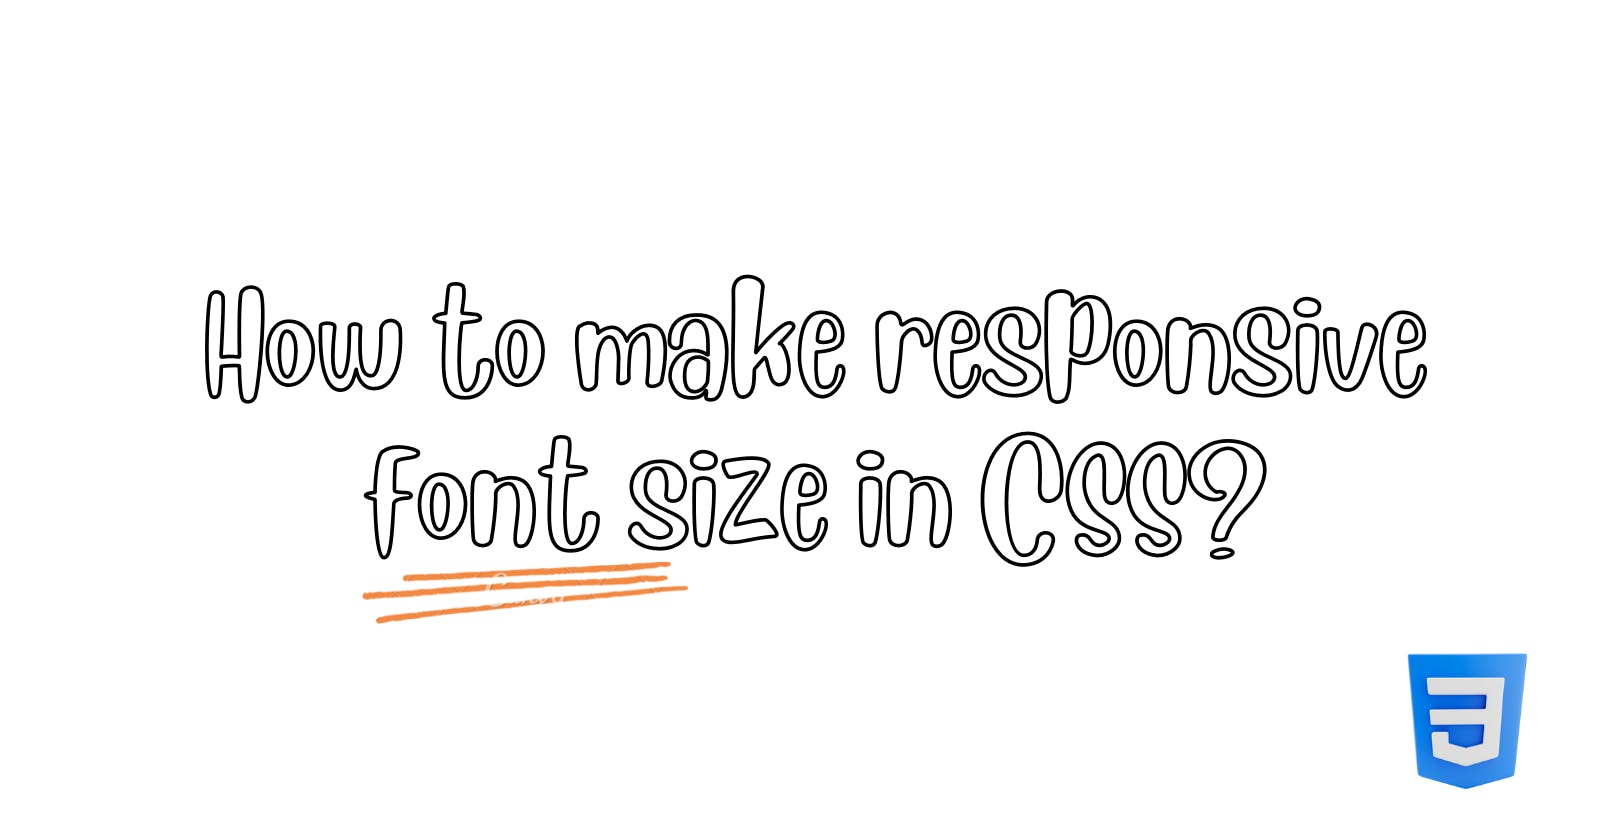 How to make responsive font size in CSS?